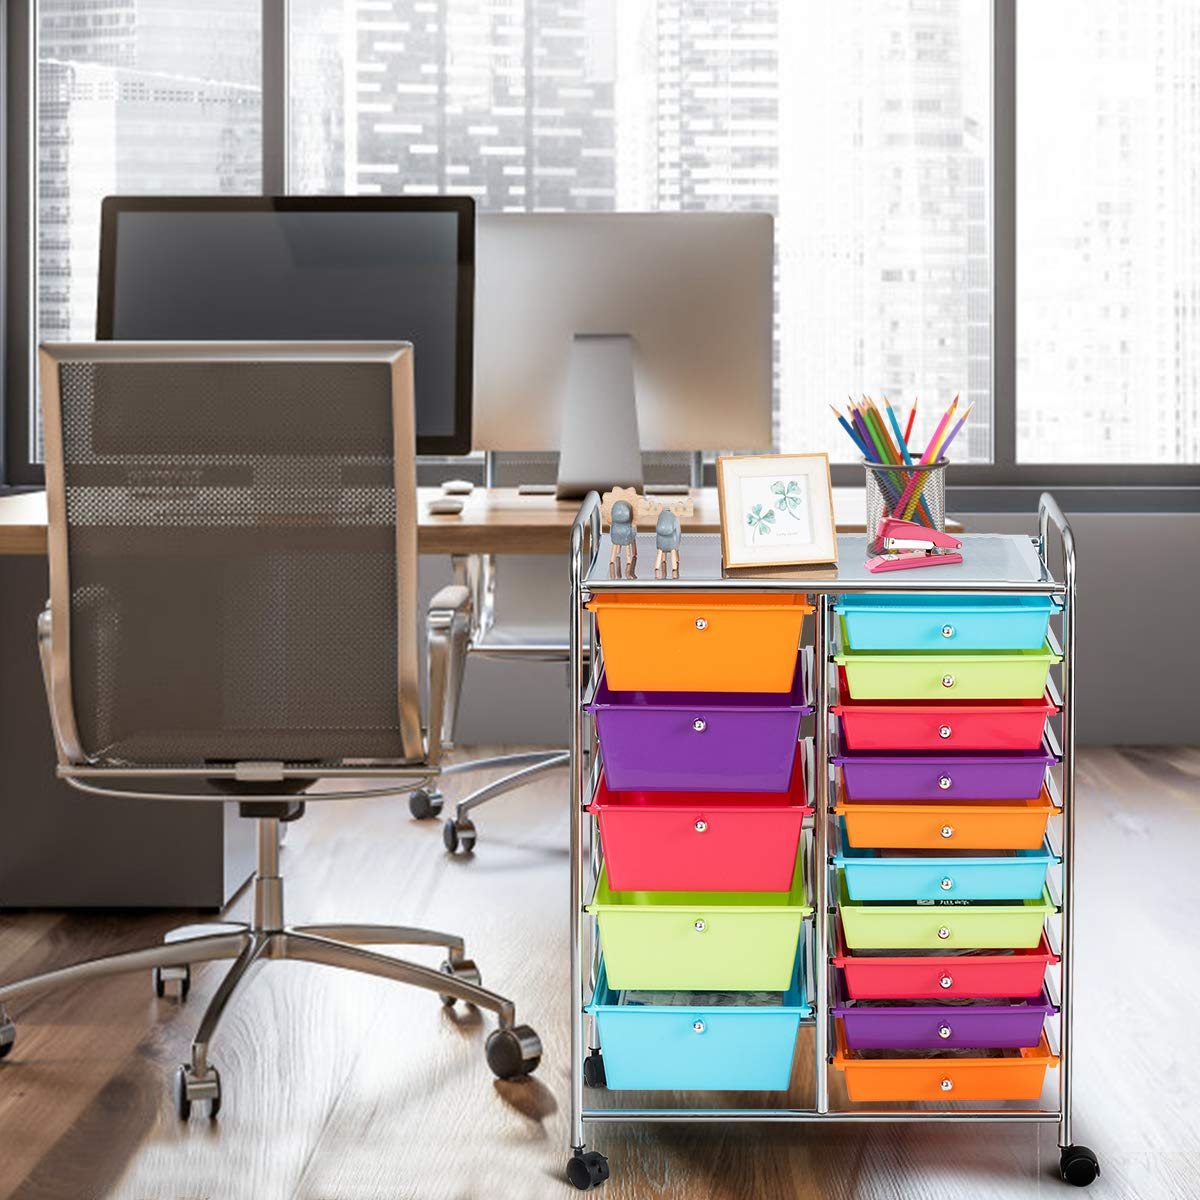 Easyfashion 15 Drawer Rolling Storage Mobile Storage Trolley Home Office Organizer, Multi-Color